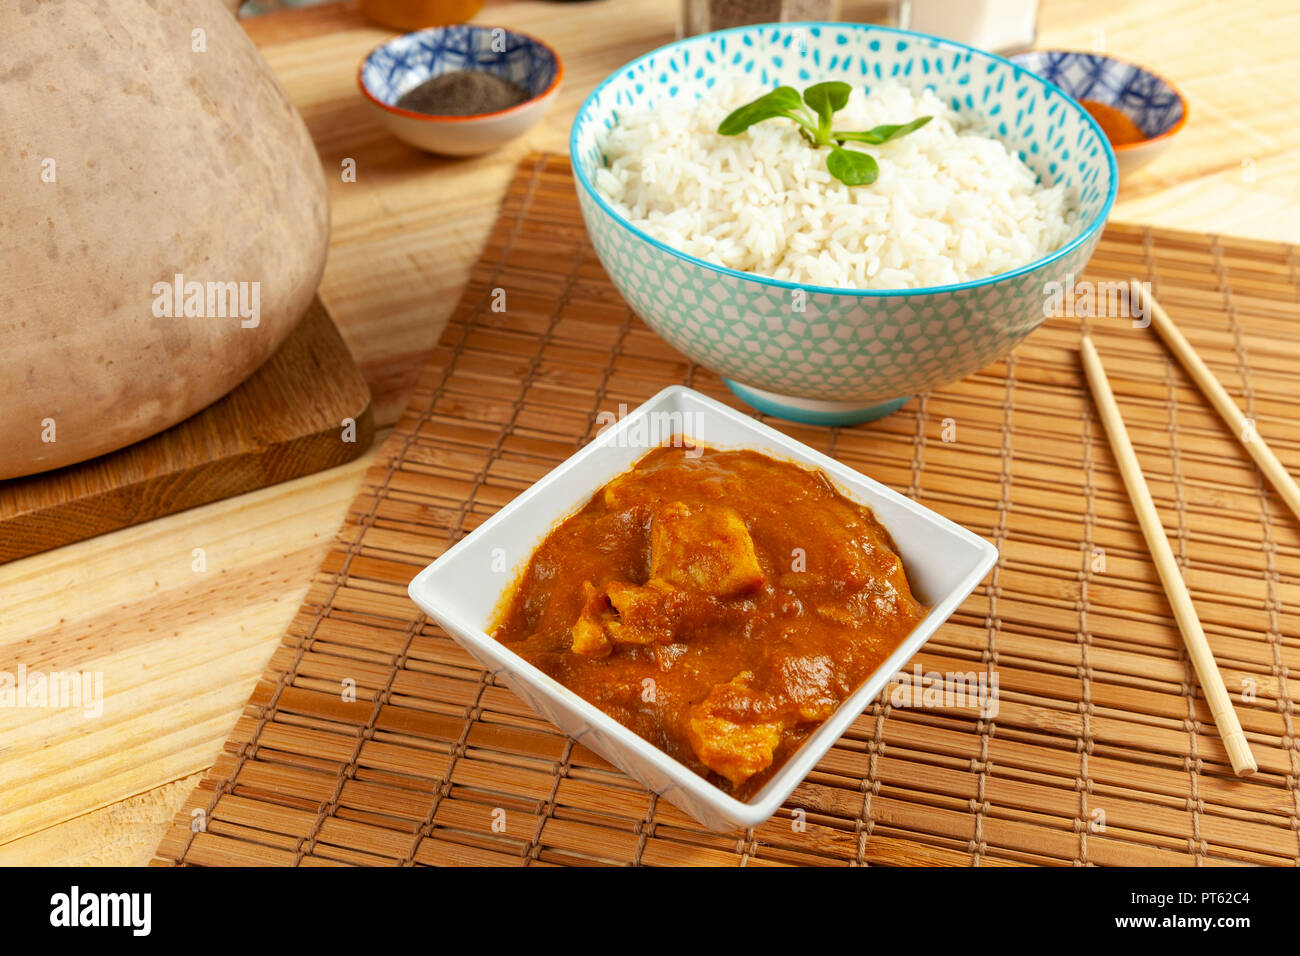 https://c8.alamy.com/comp/PT62C4/portion-of-chinese-chicken-curry-and-a-bowl-of-rice-set-out-on-a-bamboo-table-mat-with-chopsticks-PT62C4.jpg